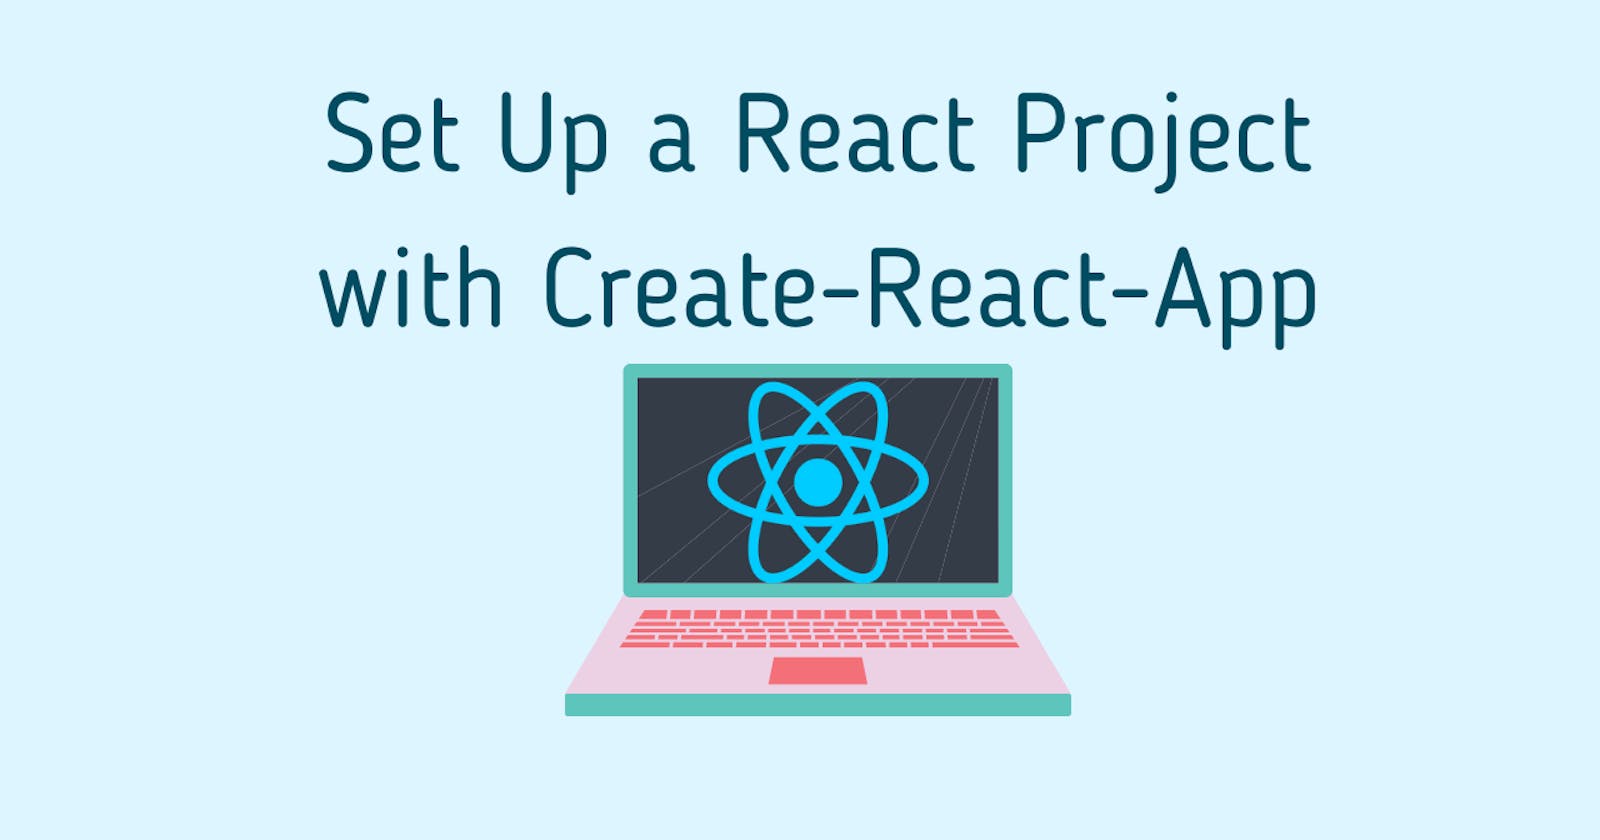 Set Up a React Project with Create-React-App